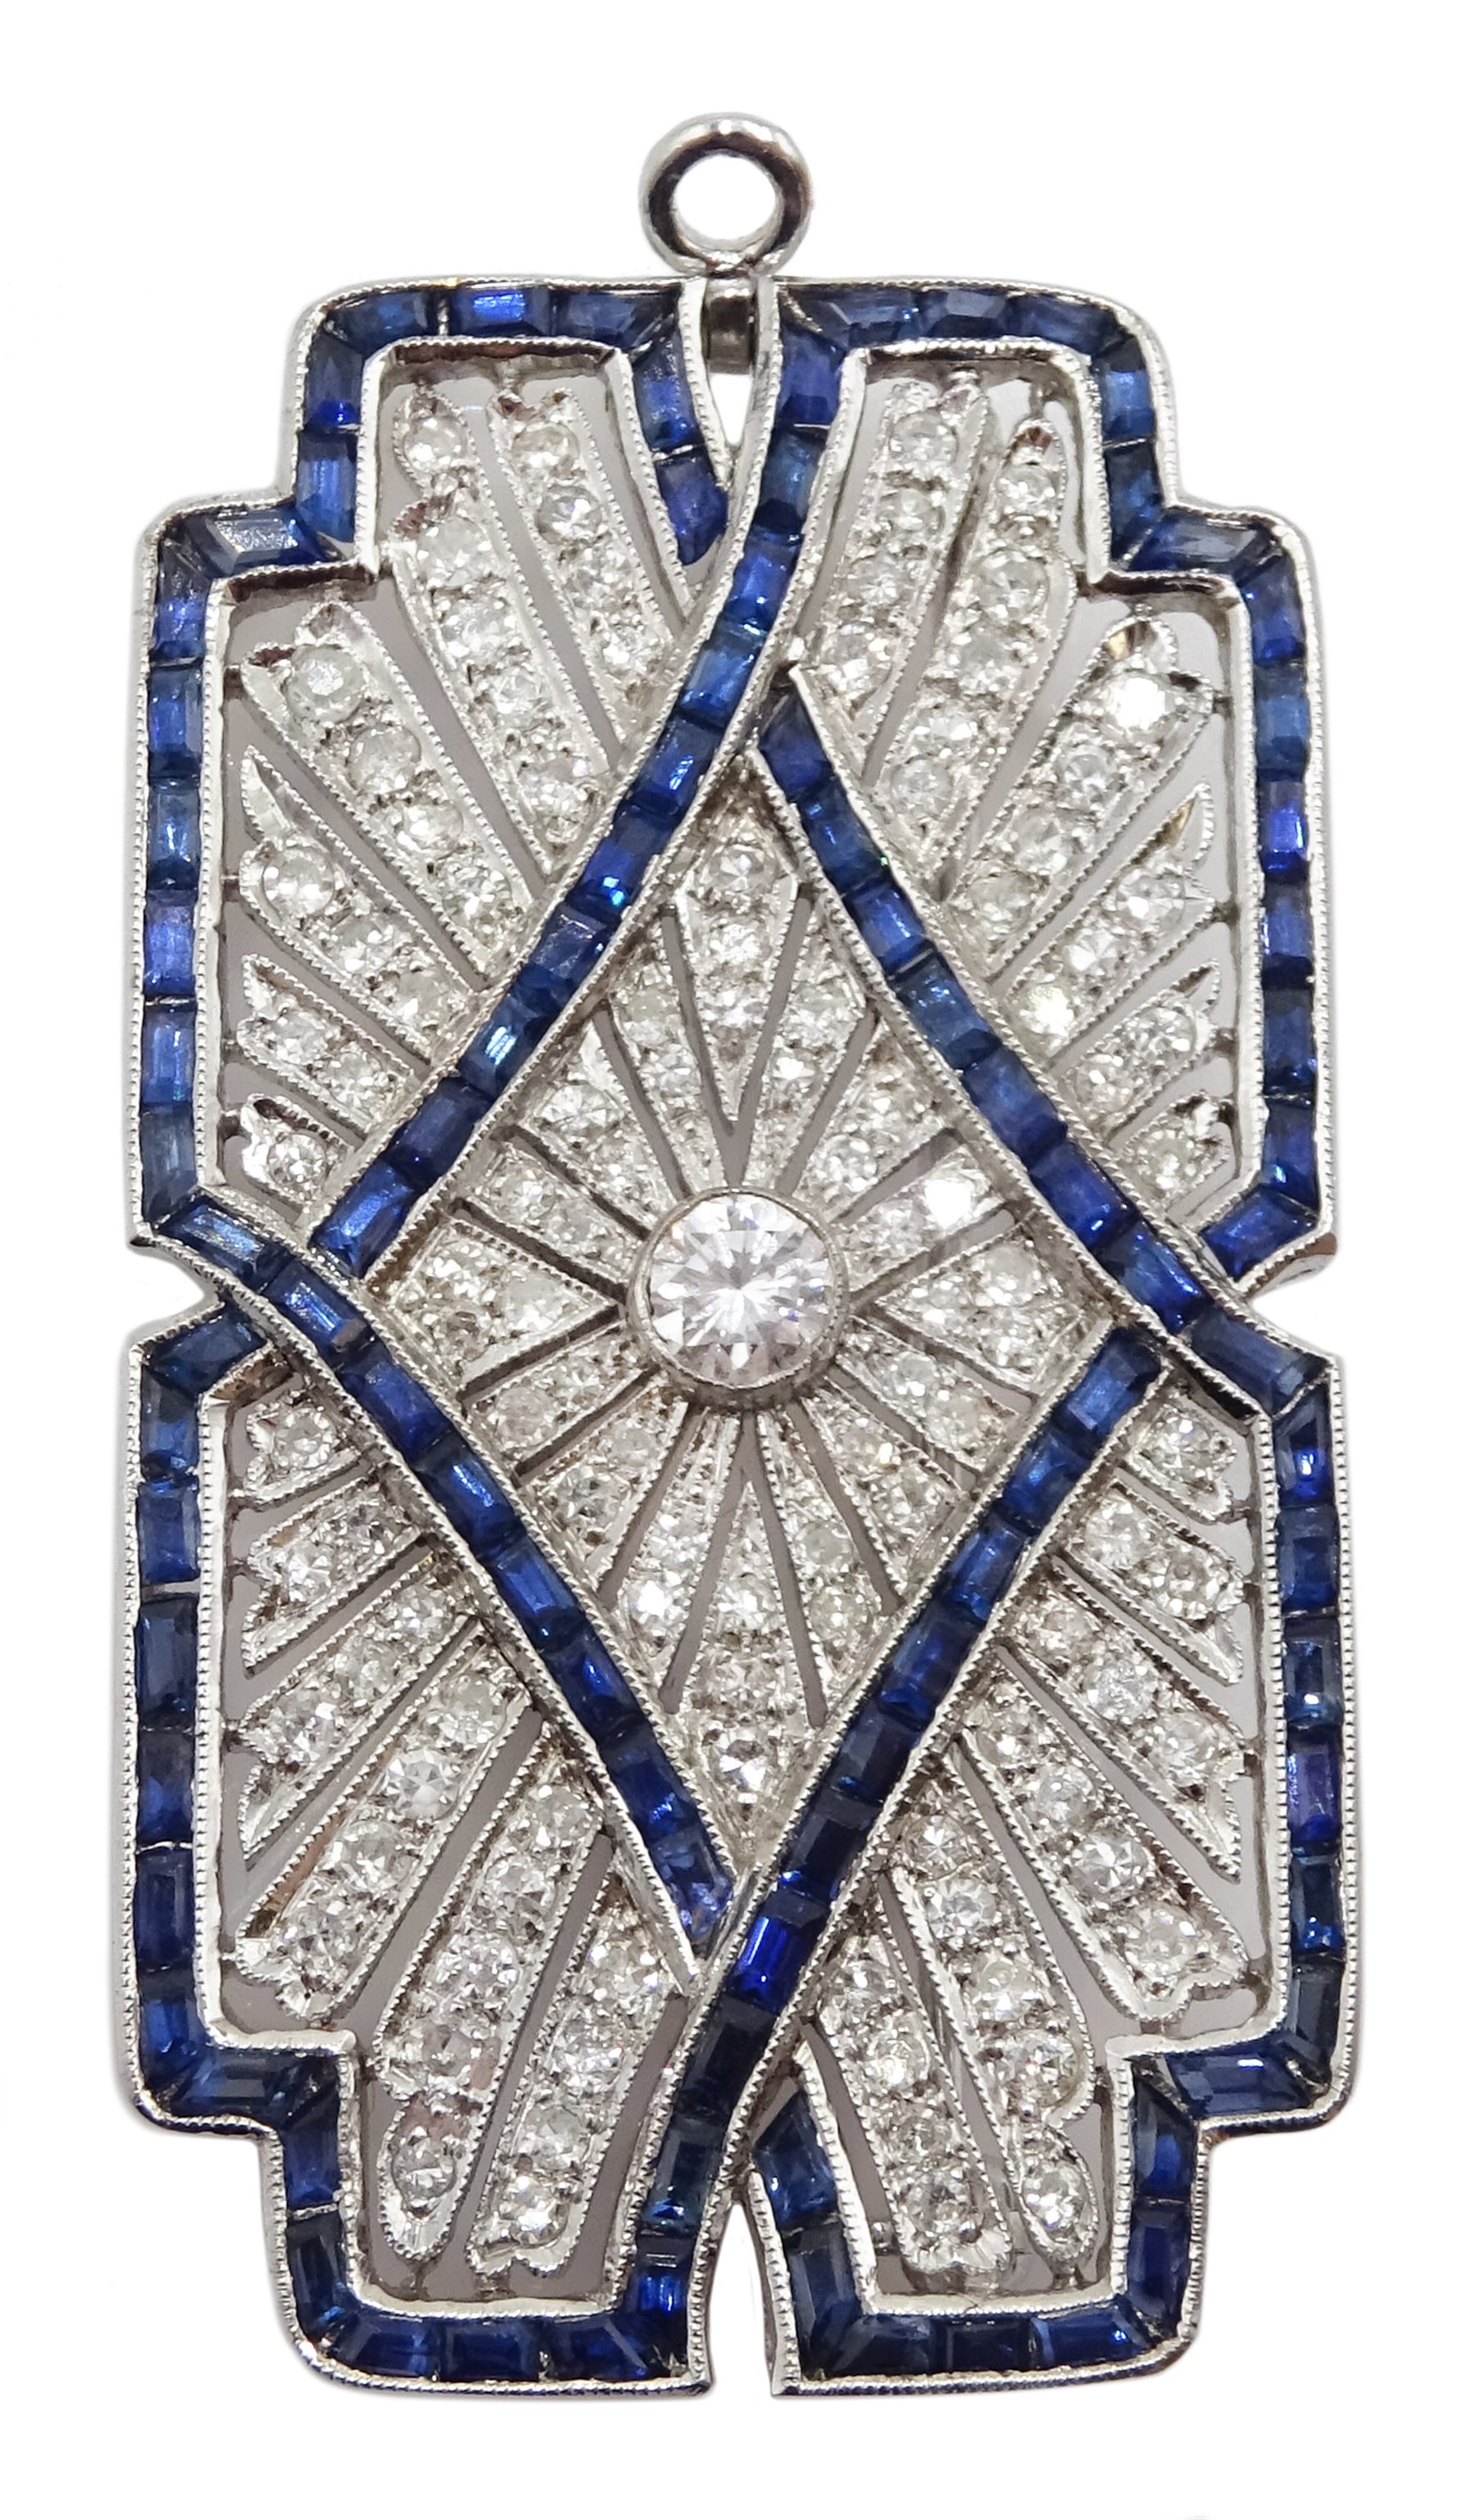 White gold calibre cut sapphire and diamond brooch, milgrain set in open work design, stamped 18K - Image 4 of 4